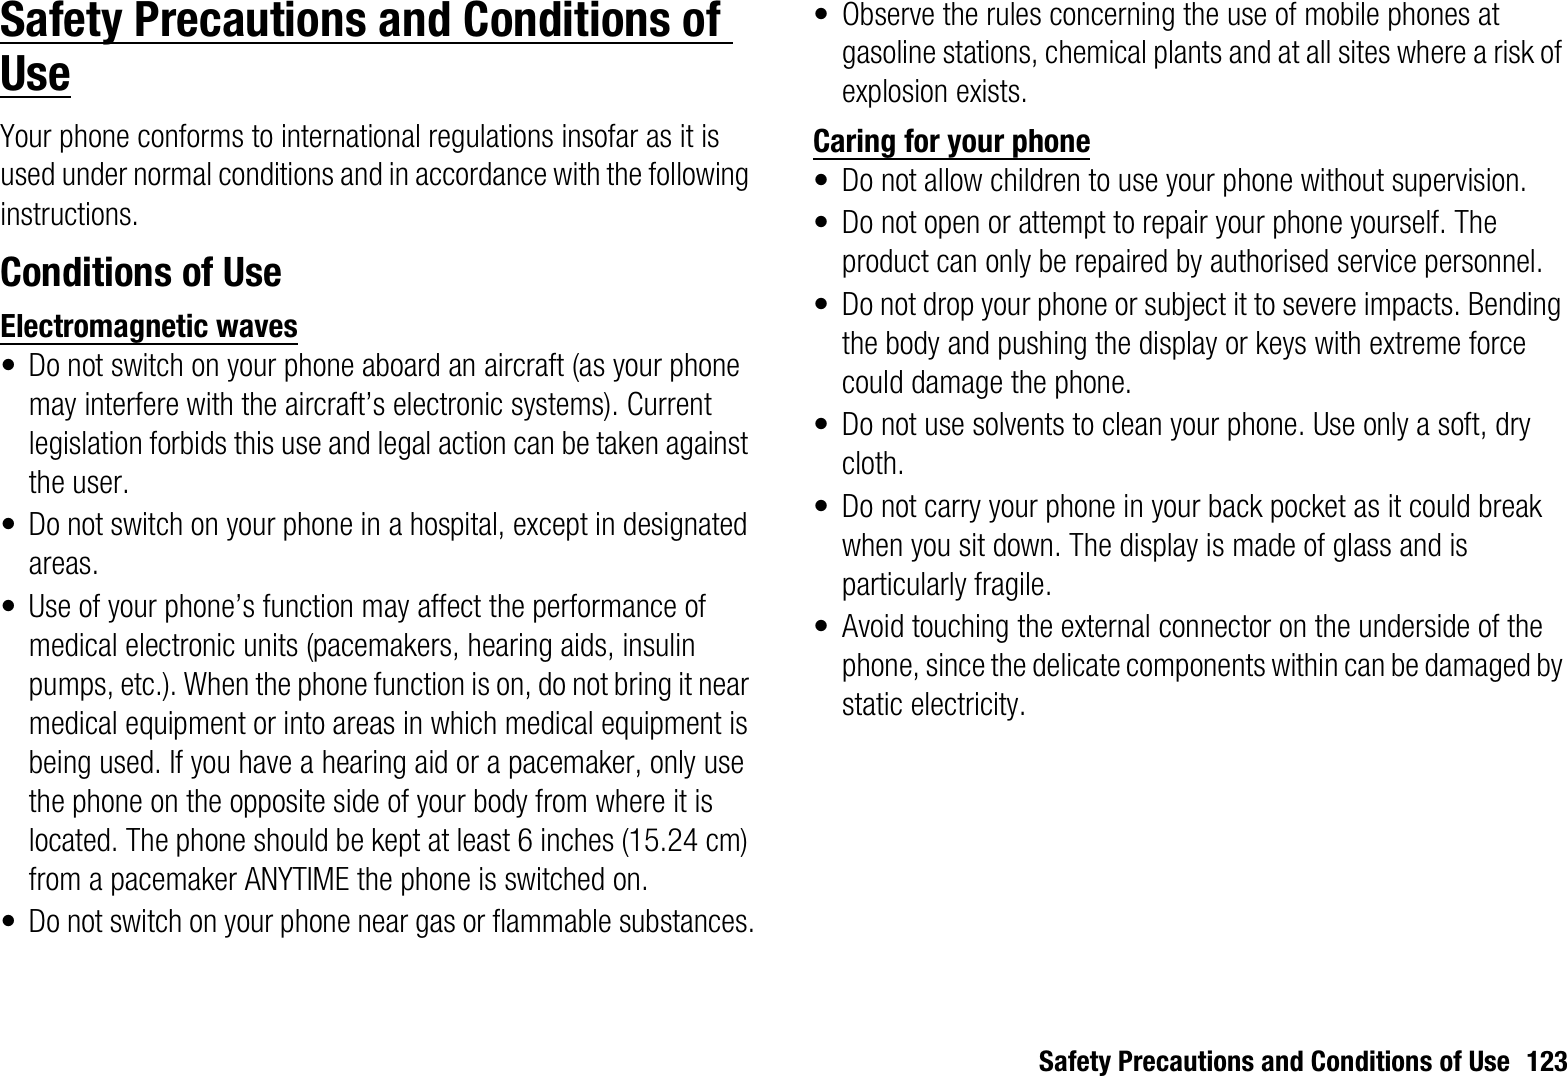 Safety Precautions and Conditions of Use 123Safety Precautions and Conditions of UseYour phone conforms to international regulations insofar as it is used under normal conditions and in accordance with the following instructions.Conditions of UseElectromagnetic waves• Do not switch on your phone aboard an aircraft (as your phone may interfere with the aircraft’s electronic systems). Current legislation forbids this use and legal action can be taken against the user.• Do not switch on your phone in a hospital, except in designated areas.• Use of your phone’s function may affect the performance of medical electronic units (pacemakers, hearing aids, insulin pumps, etc.). When the phone function is on, do not bring it near medical equipment or into areas in which medical equipment is being used. If you have a hearing aid or a pacemaker, only use the phone on the opposite side of your body from where it is located. The phone should be kept at least 6 inches (15.24 cm) from a pacemaker ANYTIME the phone is switched on.• Do not switch on your phone near gas or flammable substances.• Observe the rules concerning the use of mobile phones at gasoline stations, chemical plants and at all sites where a risk of explosion exists.Caring for your phone• Do not allow children to use your phone without supervision.• Do not open or attempt to repair your phone yourself. The product can only be repaired by authorised service personnel.• Do not drop your phone or subject it to severe impacts. Bending the body and pushing the display or keys with extreme force could damage the phone.• Do not use solvents to clean your phone. Use only a soft, dry cloth.• Do not carry your phone in your back pocket as it could break when you sit down. The display is made of glass and is particularly fragile.• Avoid touching the external connector on the underside of the phone, since the delicate components within can be damaged by static electricity.